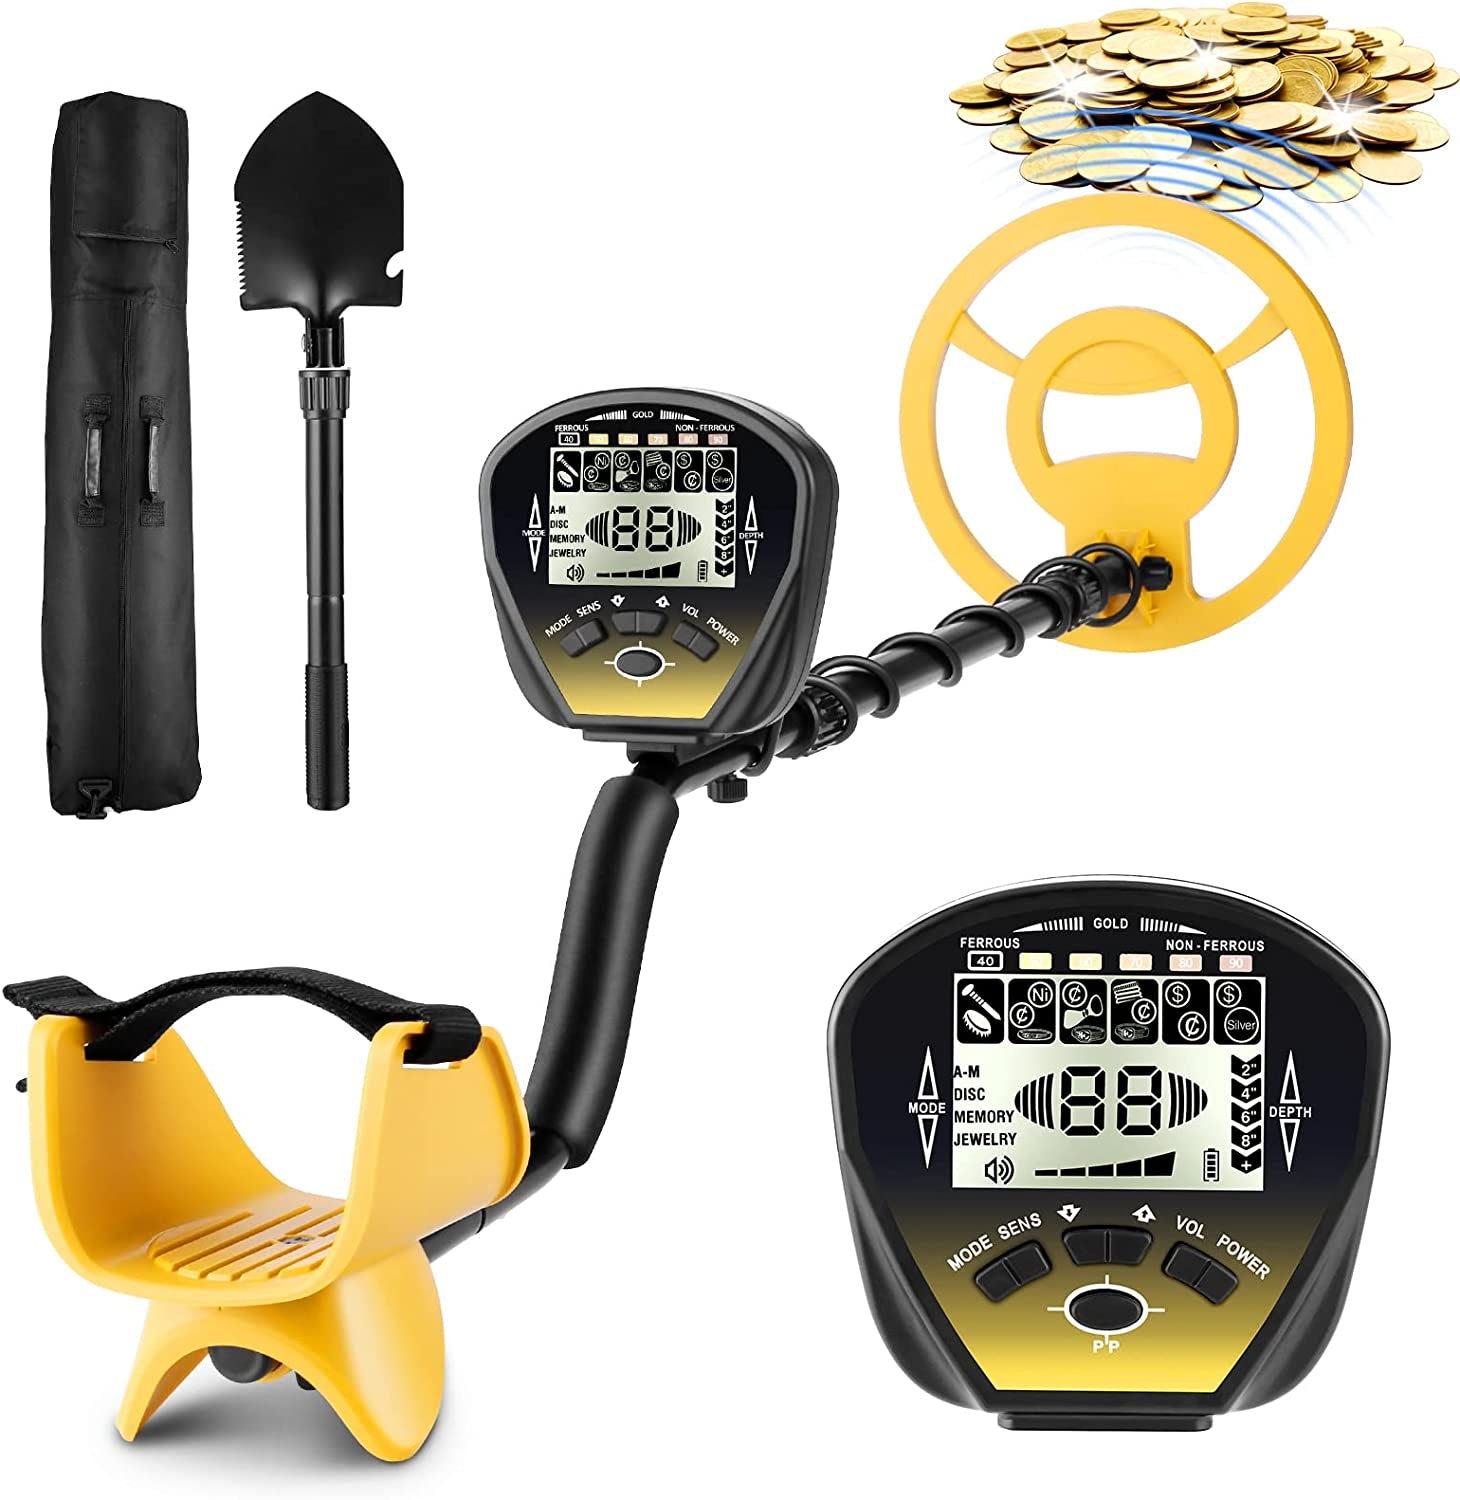 Nictiv, Metal Detector, High Accuracy Adjustable Gold Detector with LCD Display, 5 Mode Underwater Metal Detector, Advanced DSP &10" Inches Lightweight Search Coil, Carrying Bag and Shovel for Easy Travel